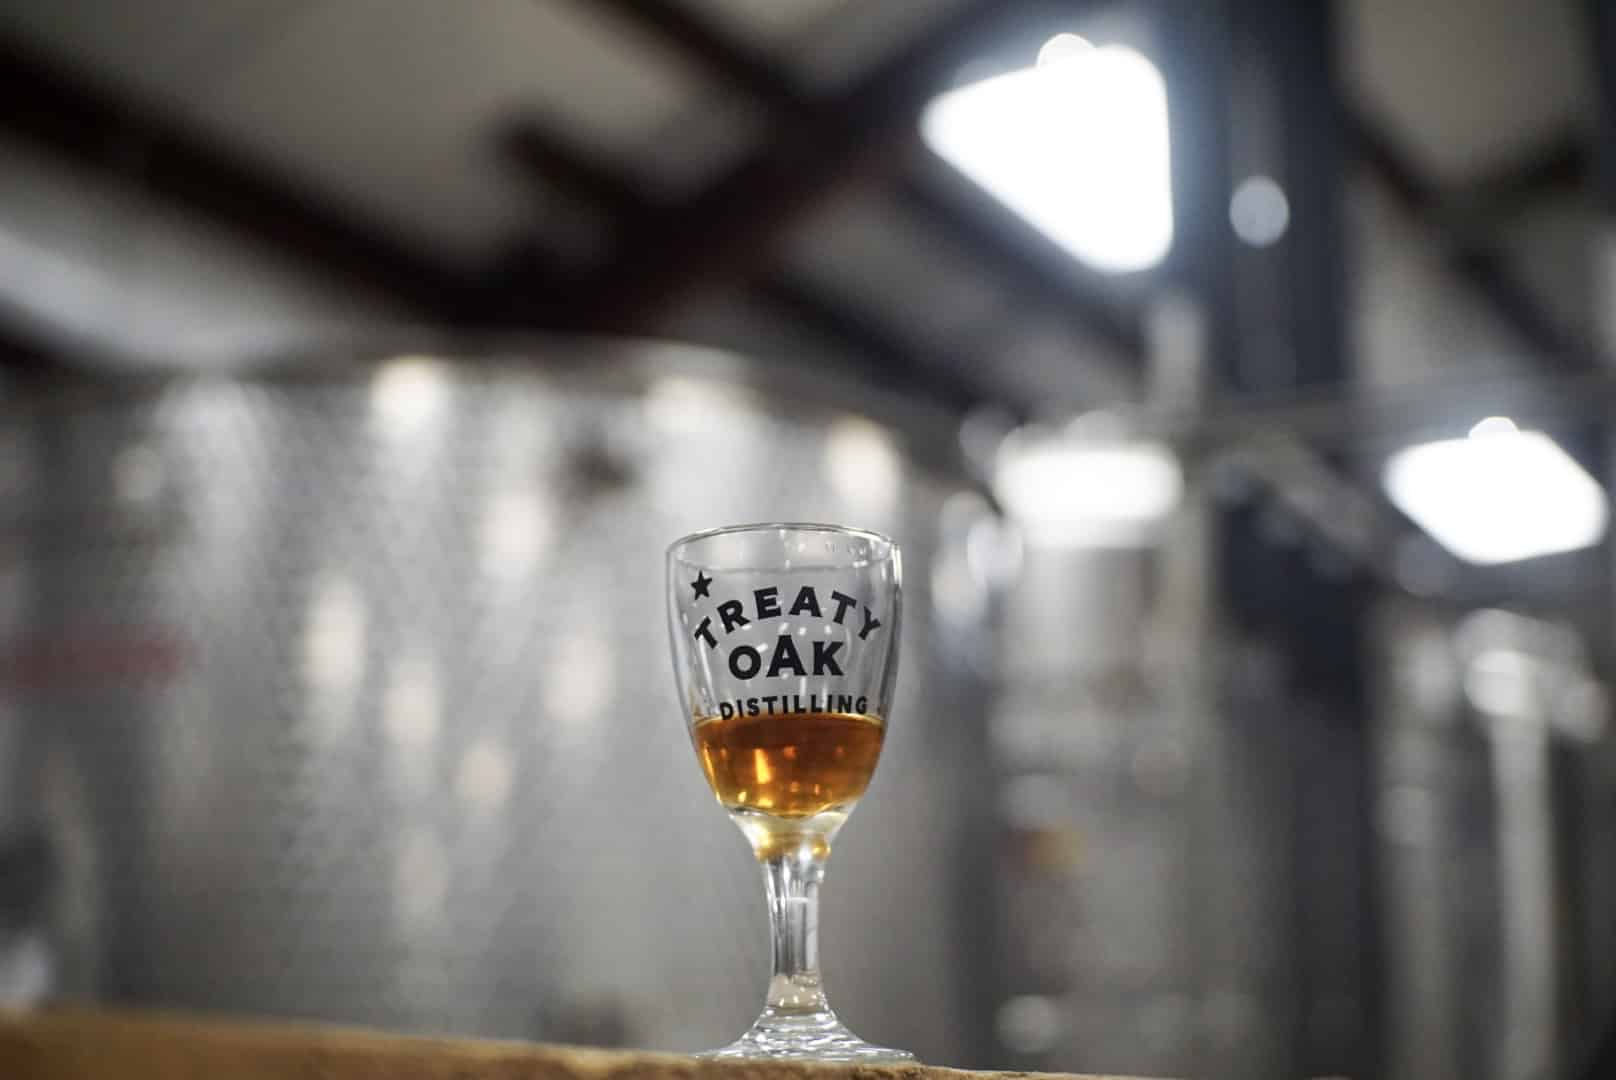 Tasting the Experimental Collection Treaty Oak